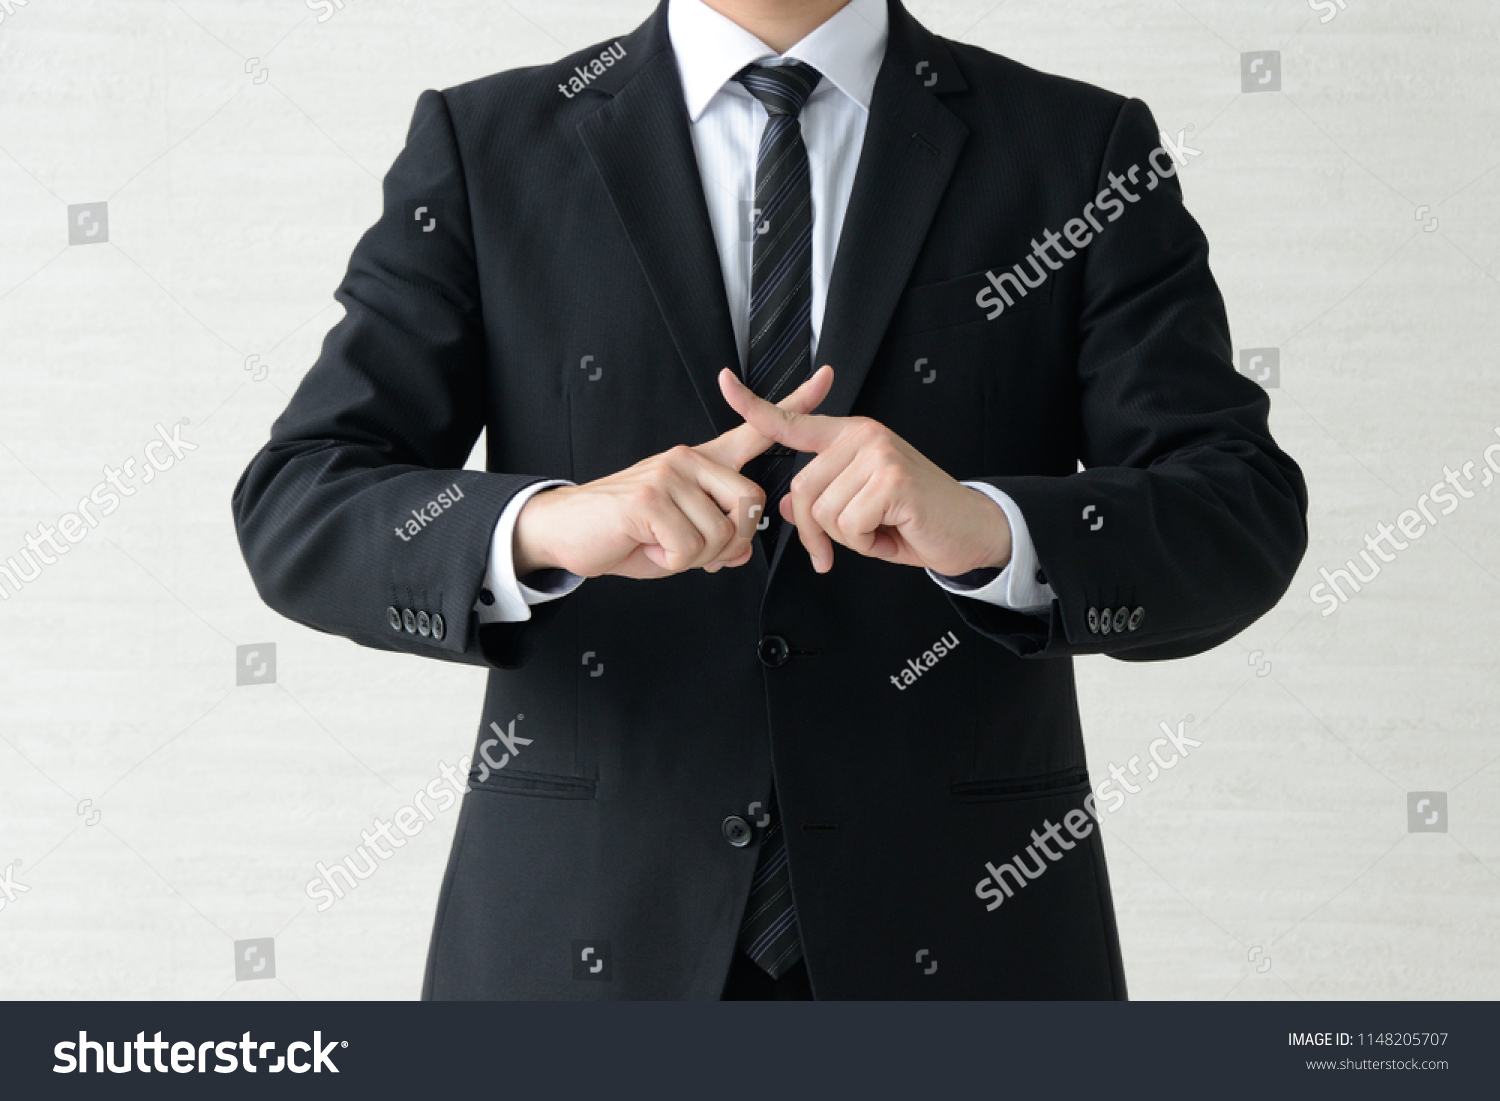 Business man with fingers crossed #1148205707